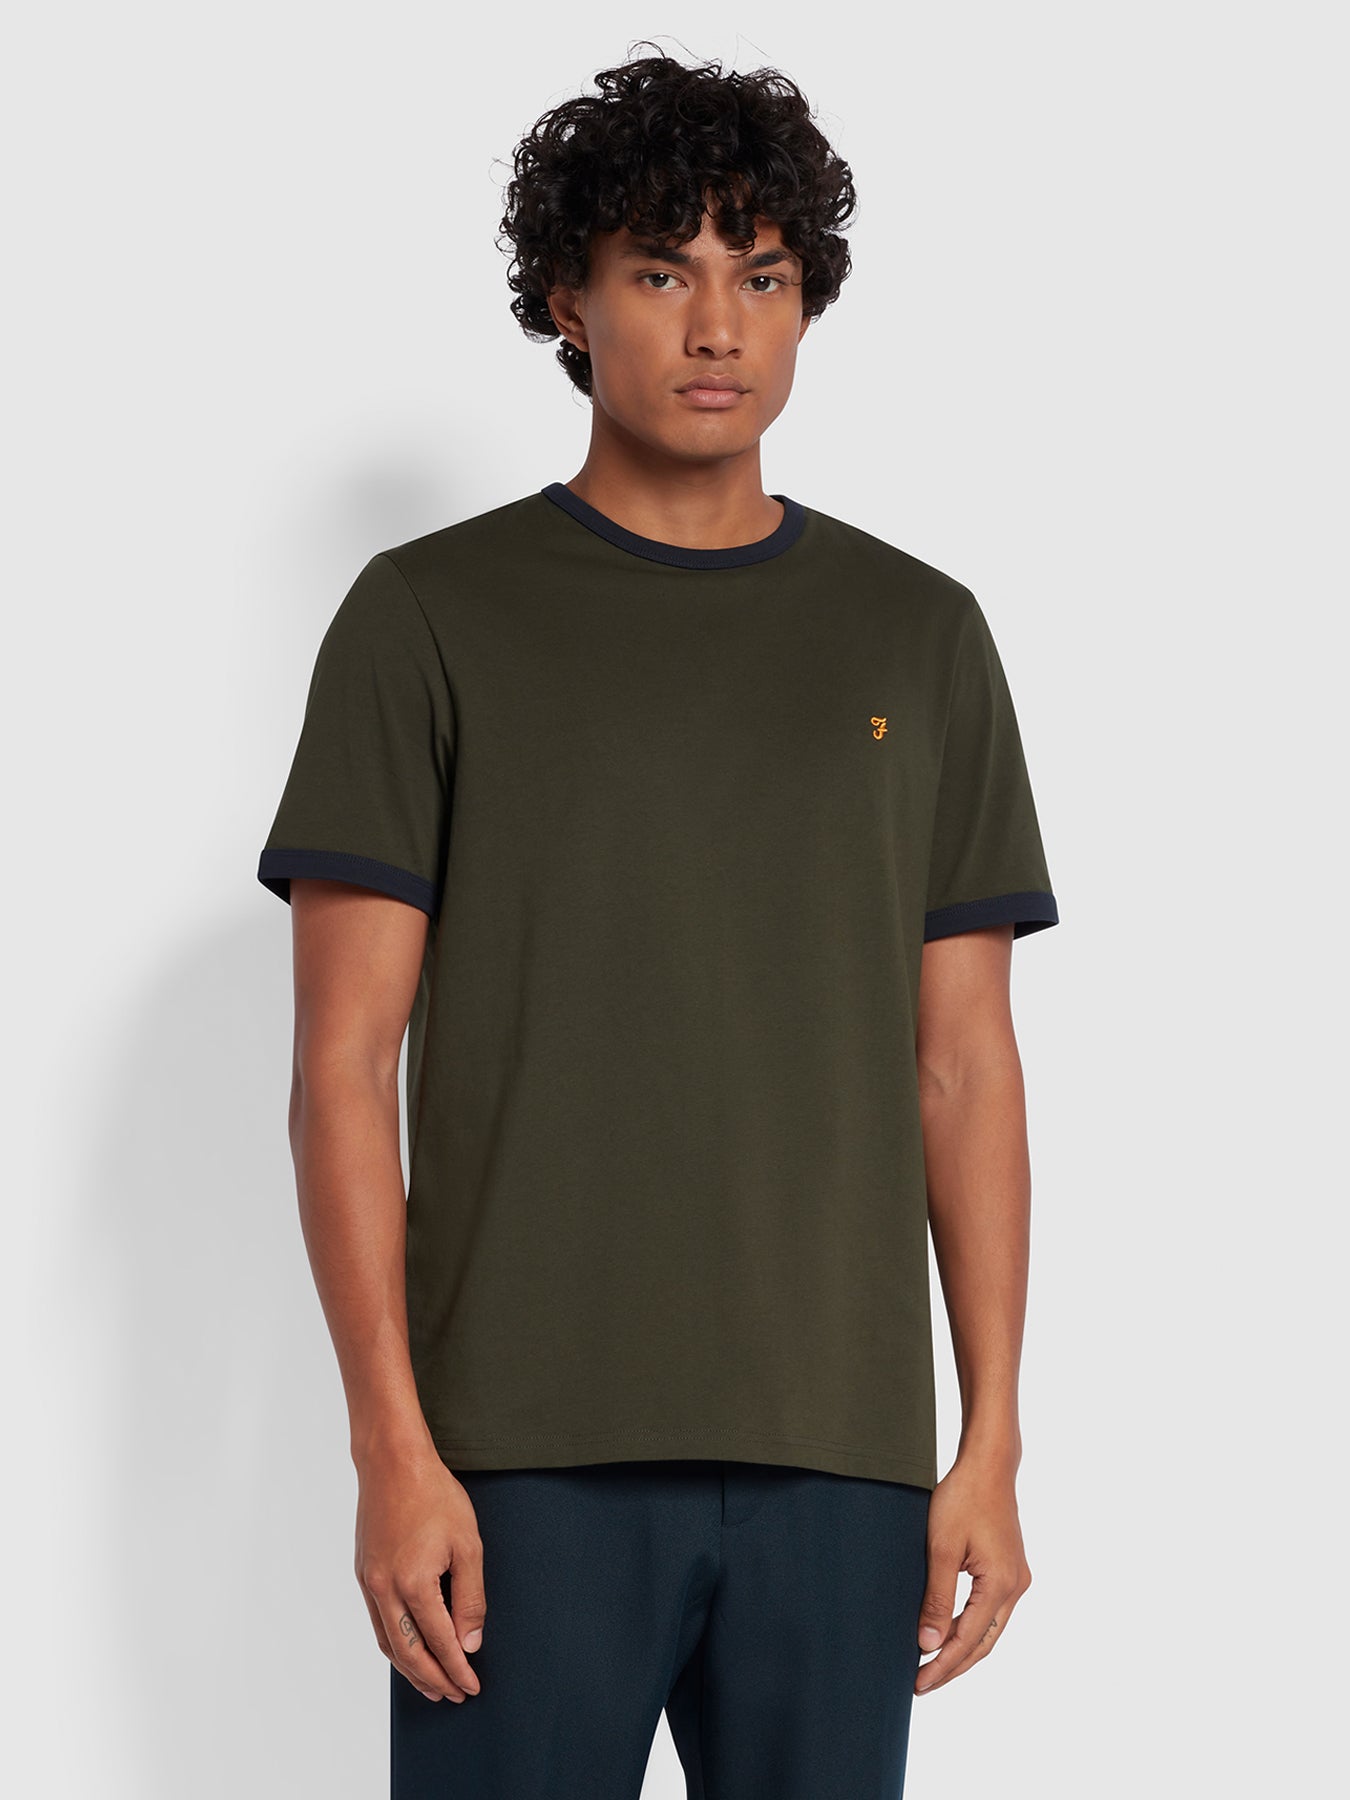 View Groves Slim Fit Organic Cotton Ringer TShirt In Evergreen information